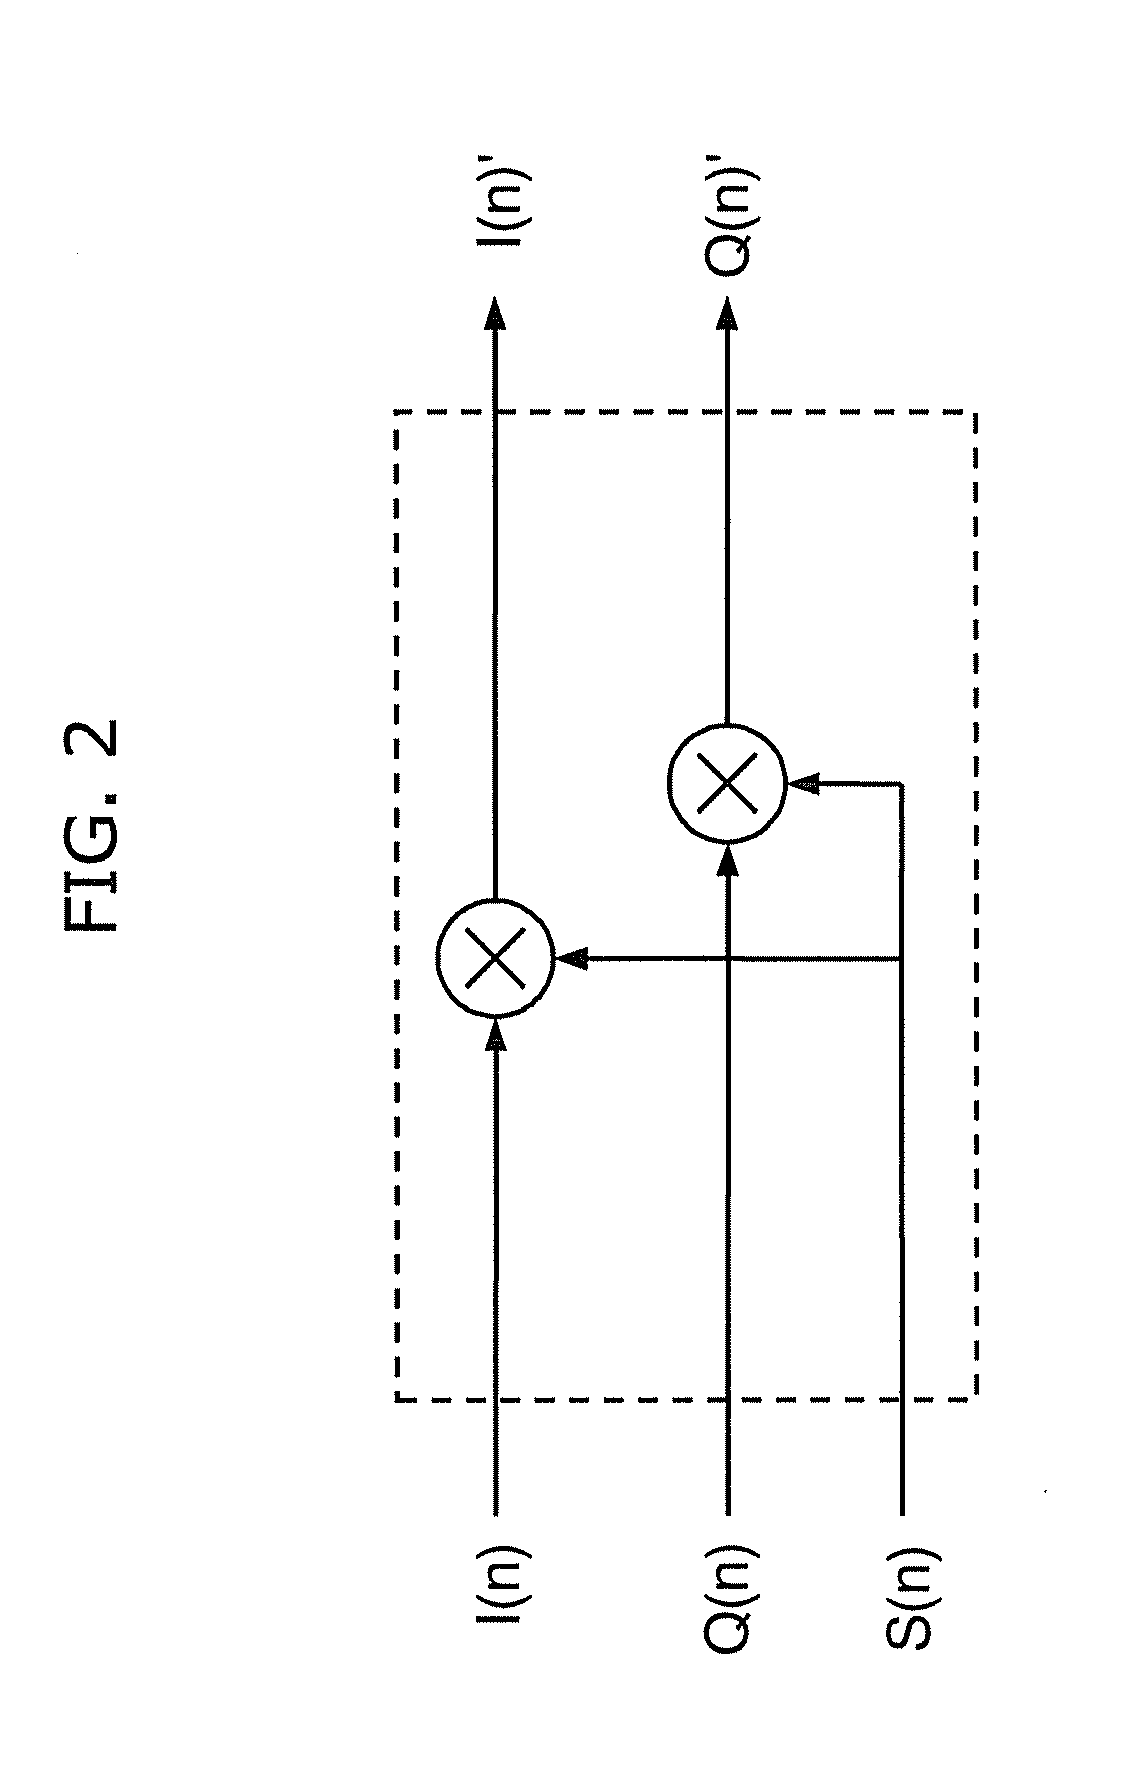 Signal receiving apparatus and method for wireless communication system using multiple antennas